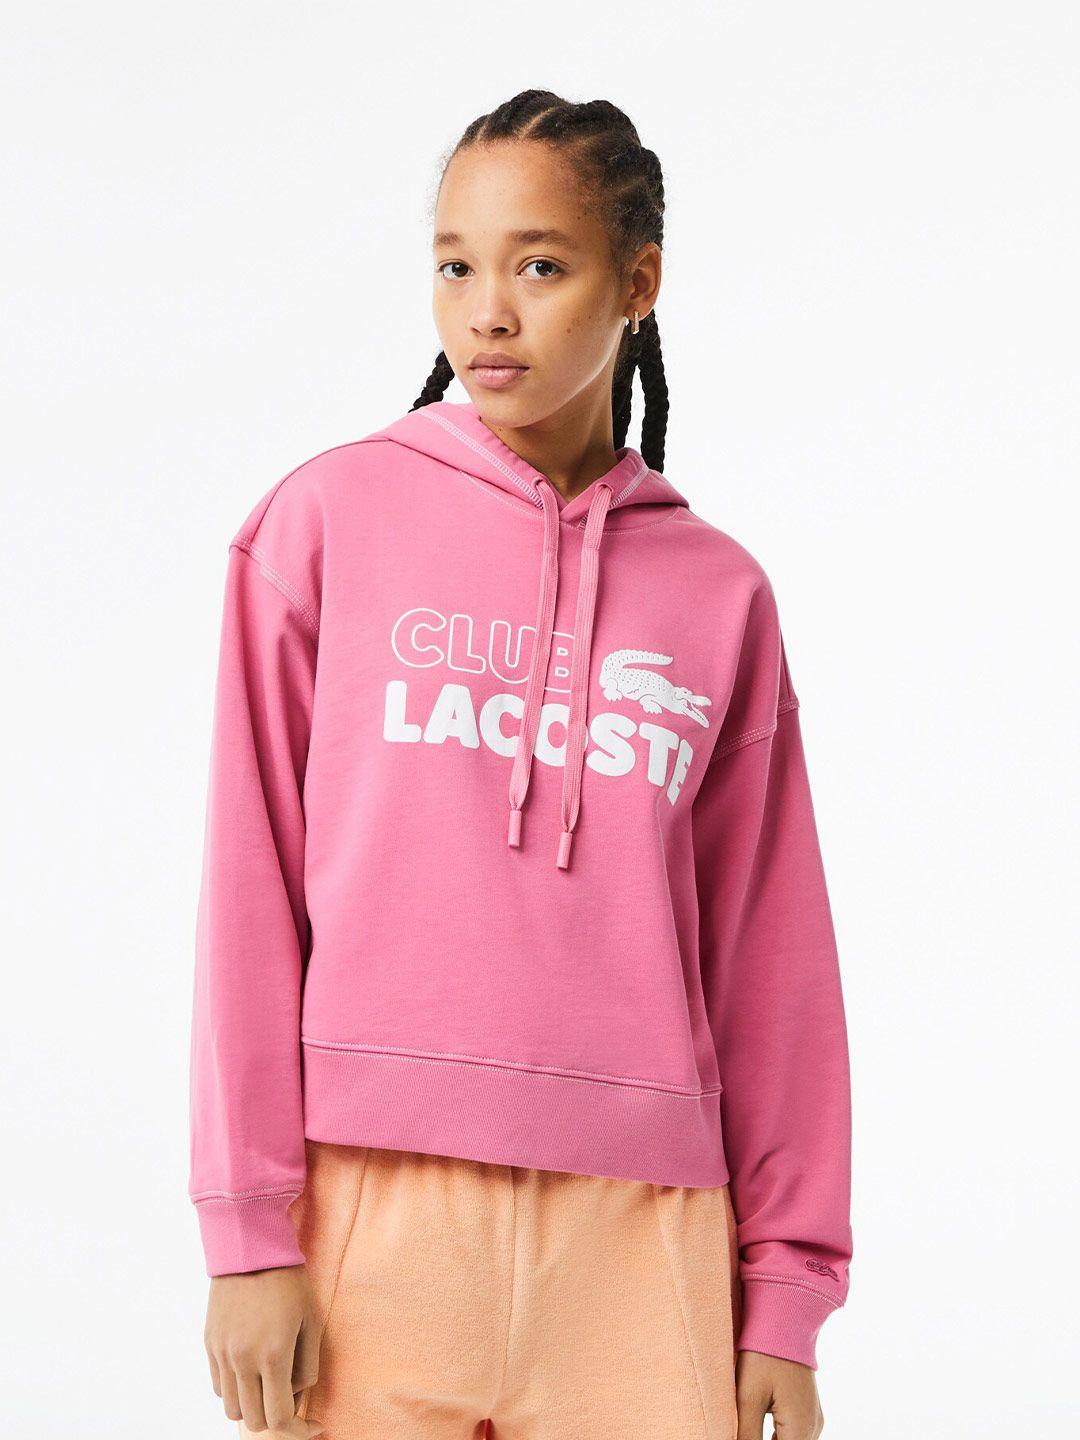 lacoste typography printed hooded pure cotton pullover sweatshirt